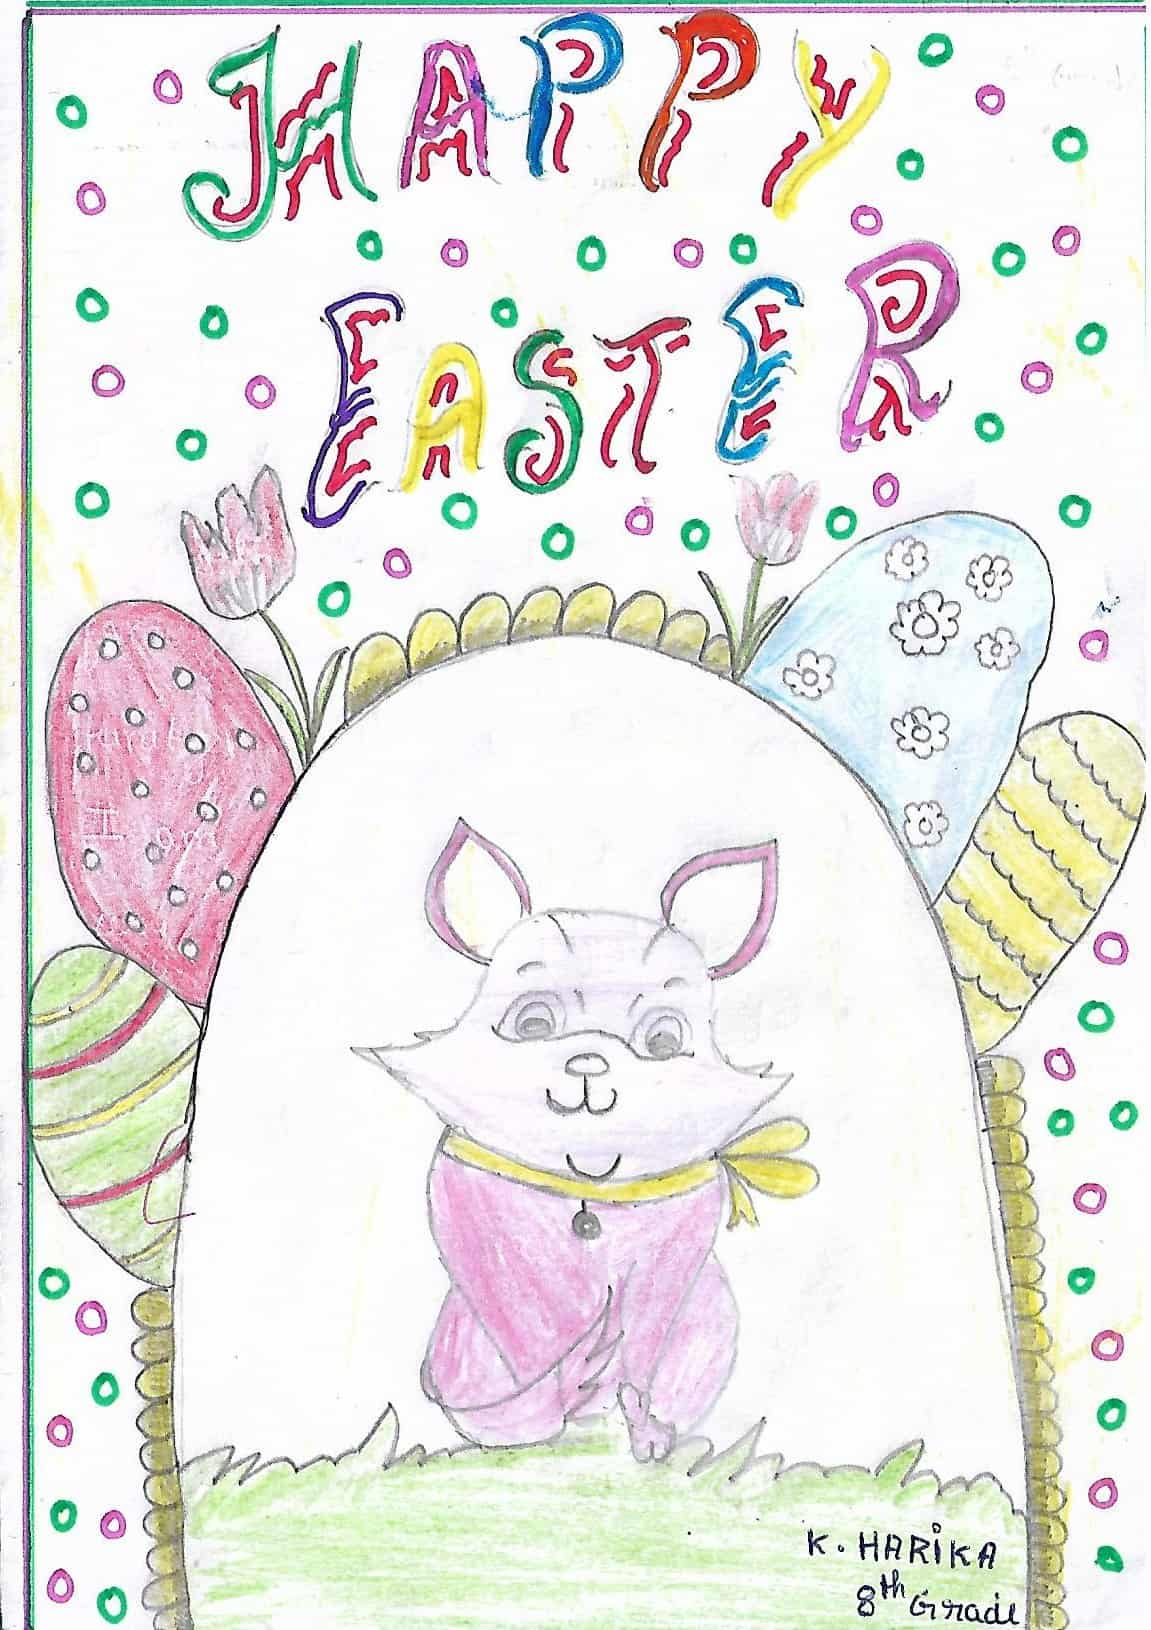 A student in India's drawing of a animal with Happy Easter